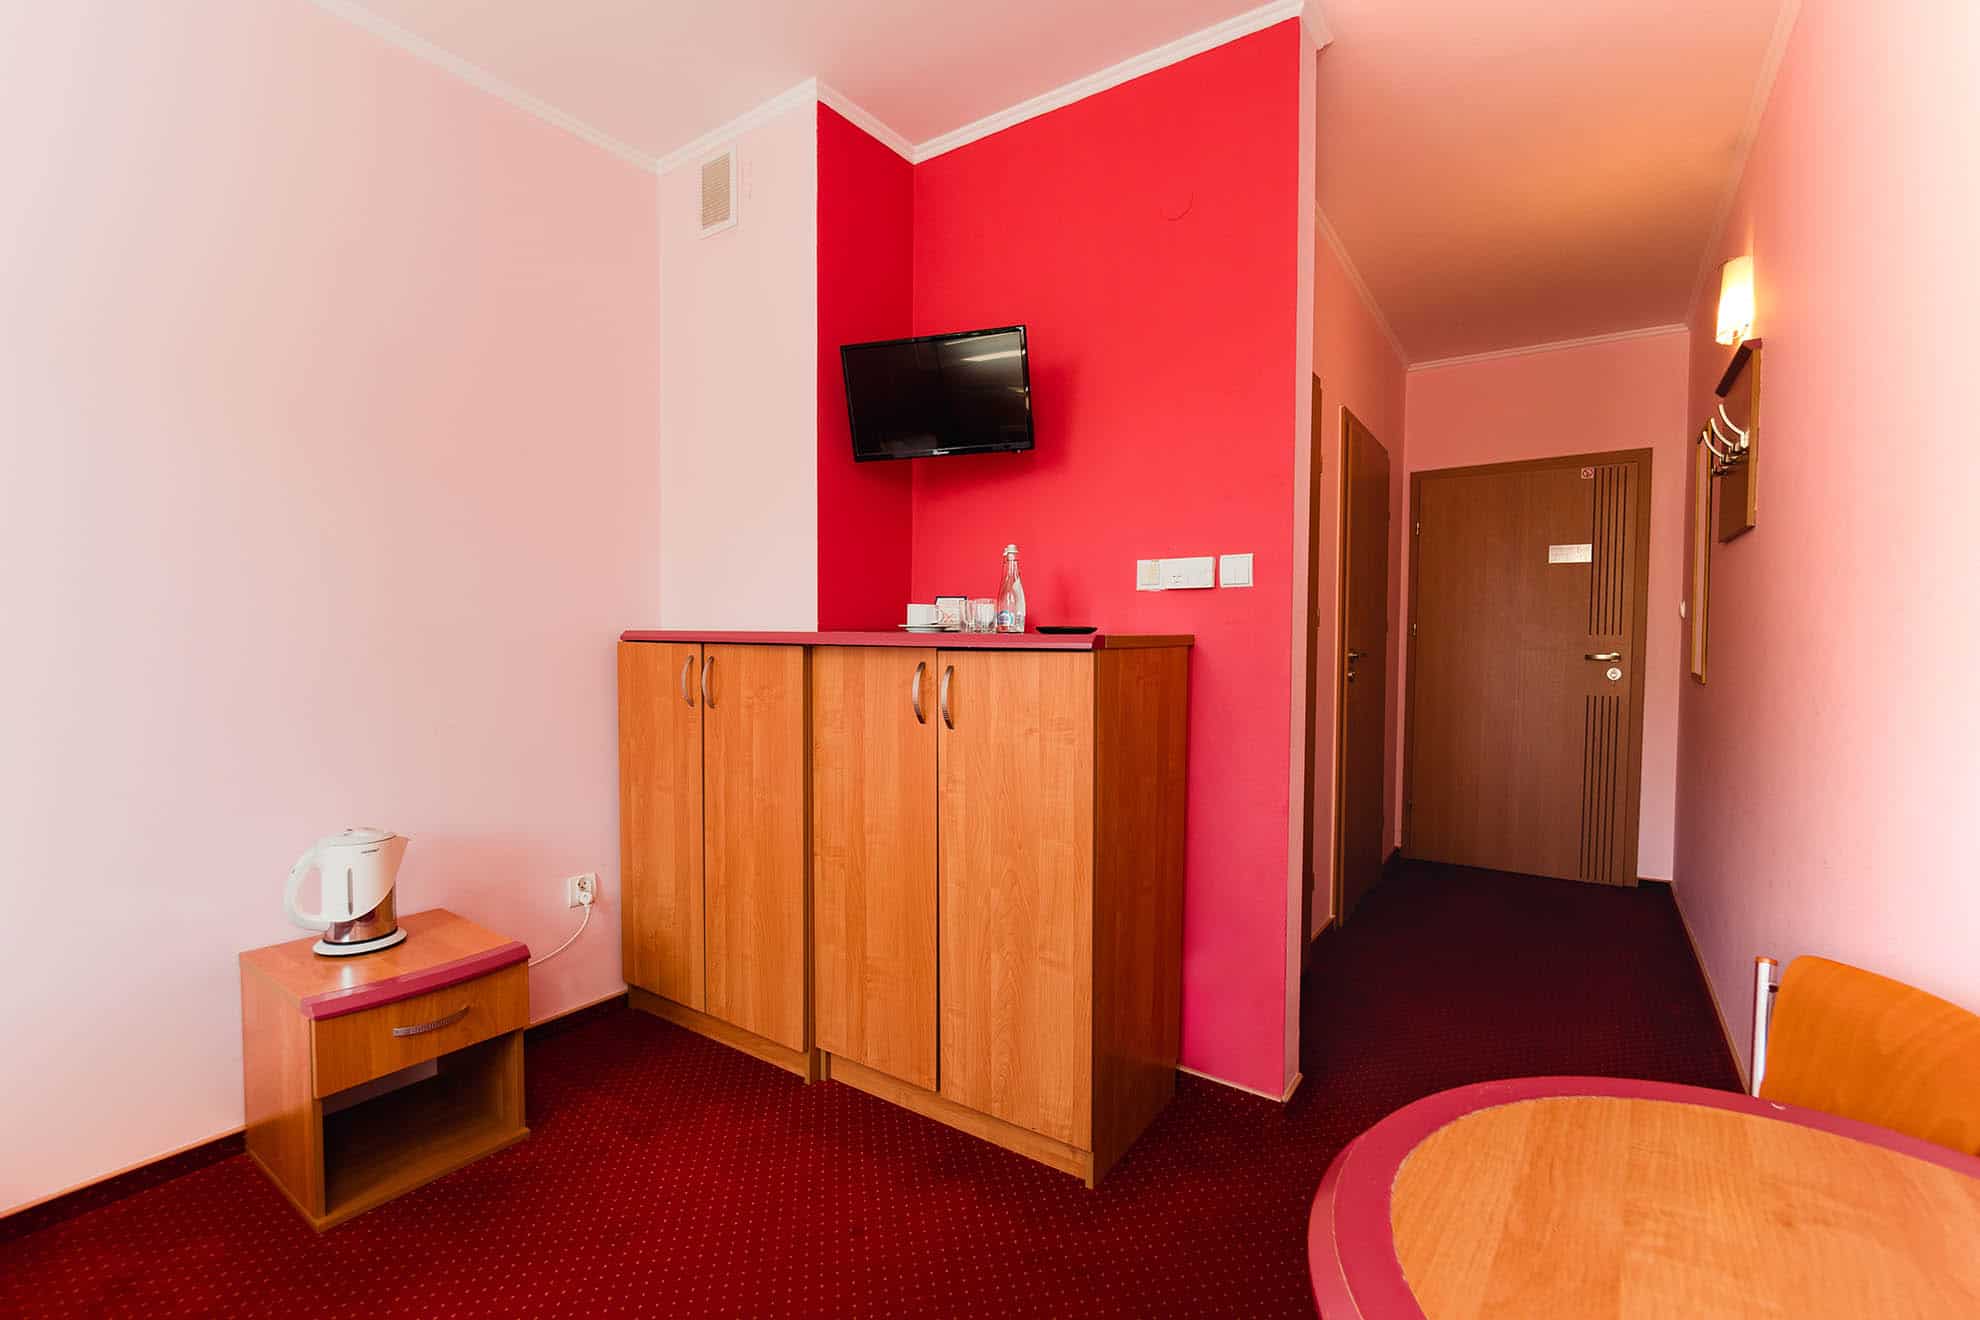 ROOMS Krosno accommodation in the city center, rest in Poland 03